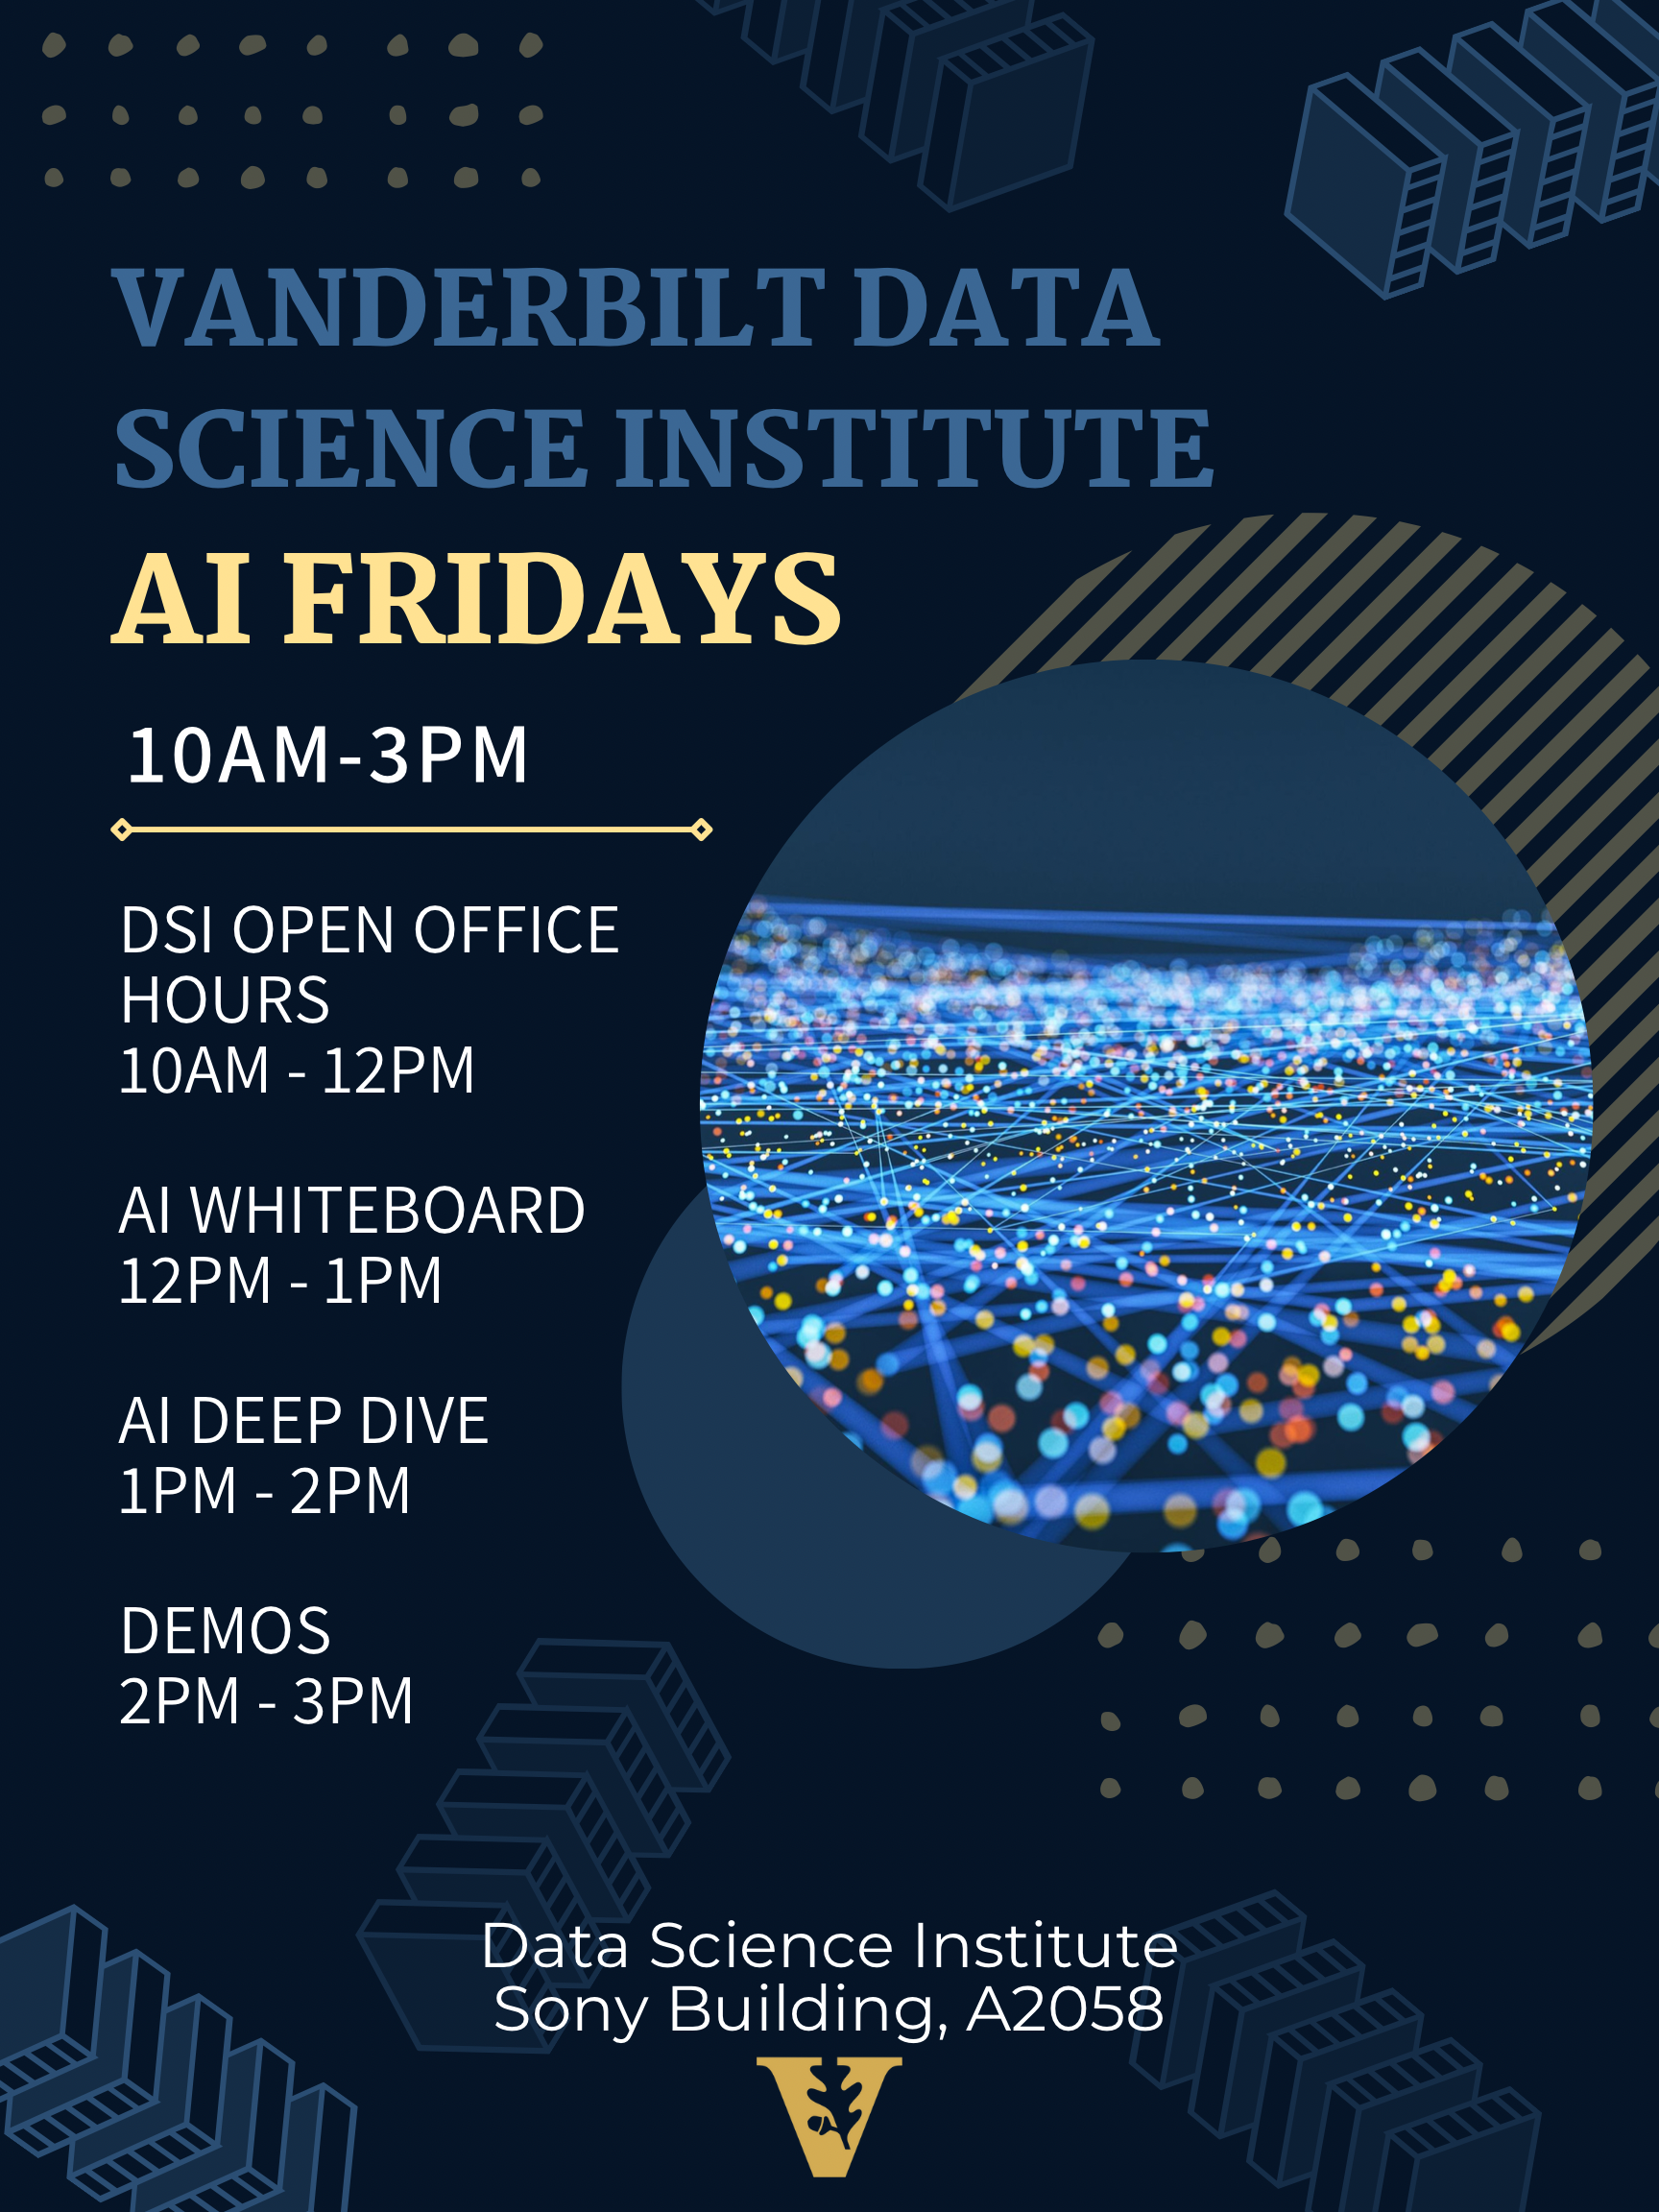 A poster image for AI Fridays